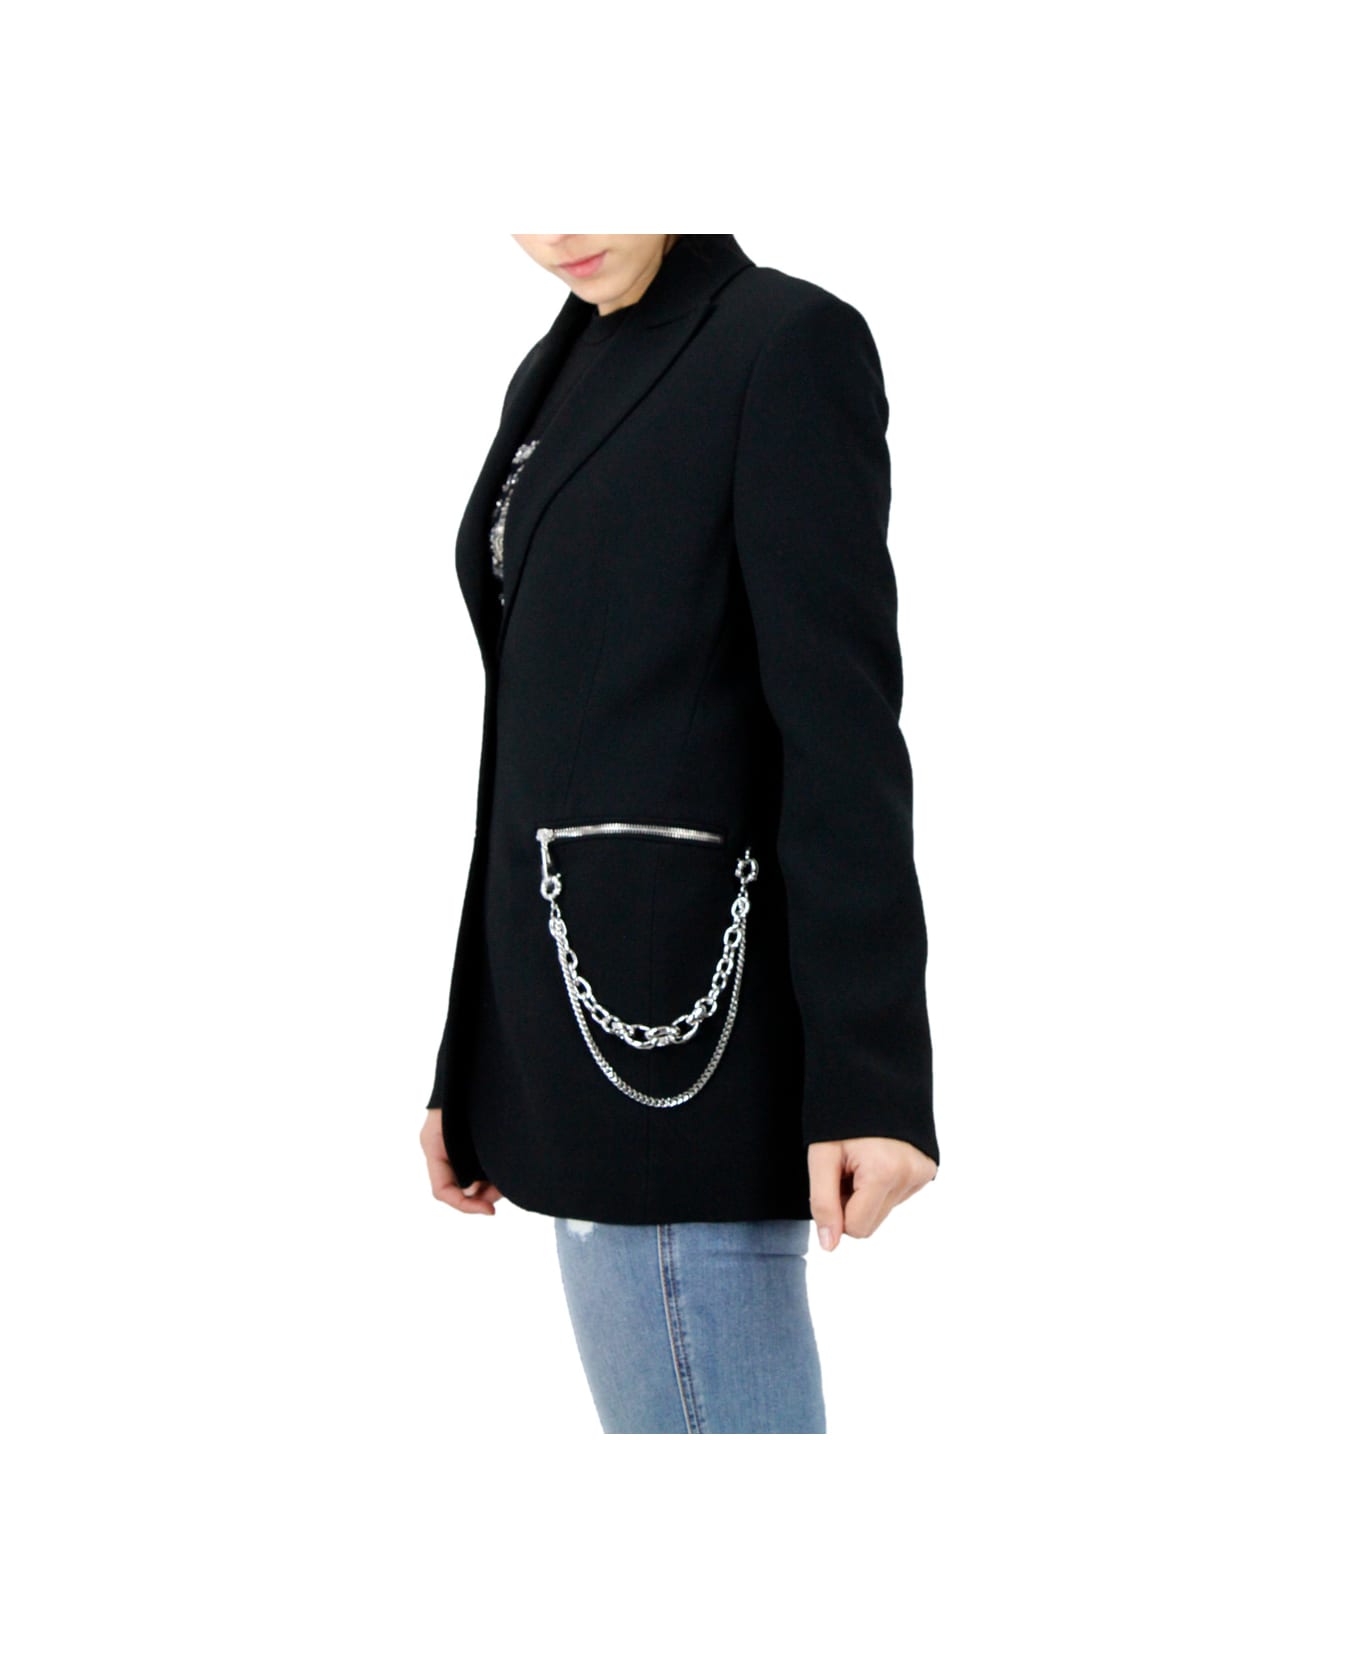 Ermanno Scervino Single-breasted Jacket Made Of Soft Stretch Viscose, Two-button Closure, Zip Pockets And Chain On The Pocket - Black